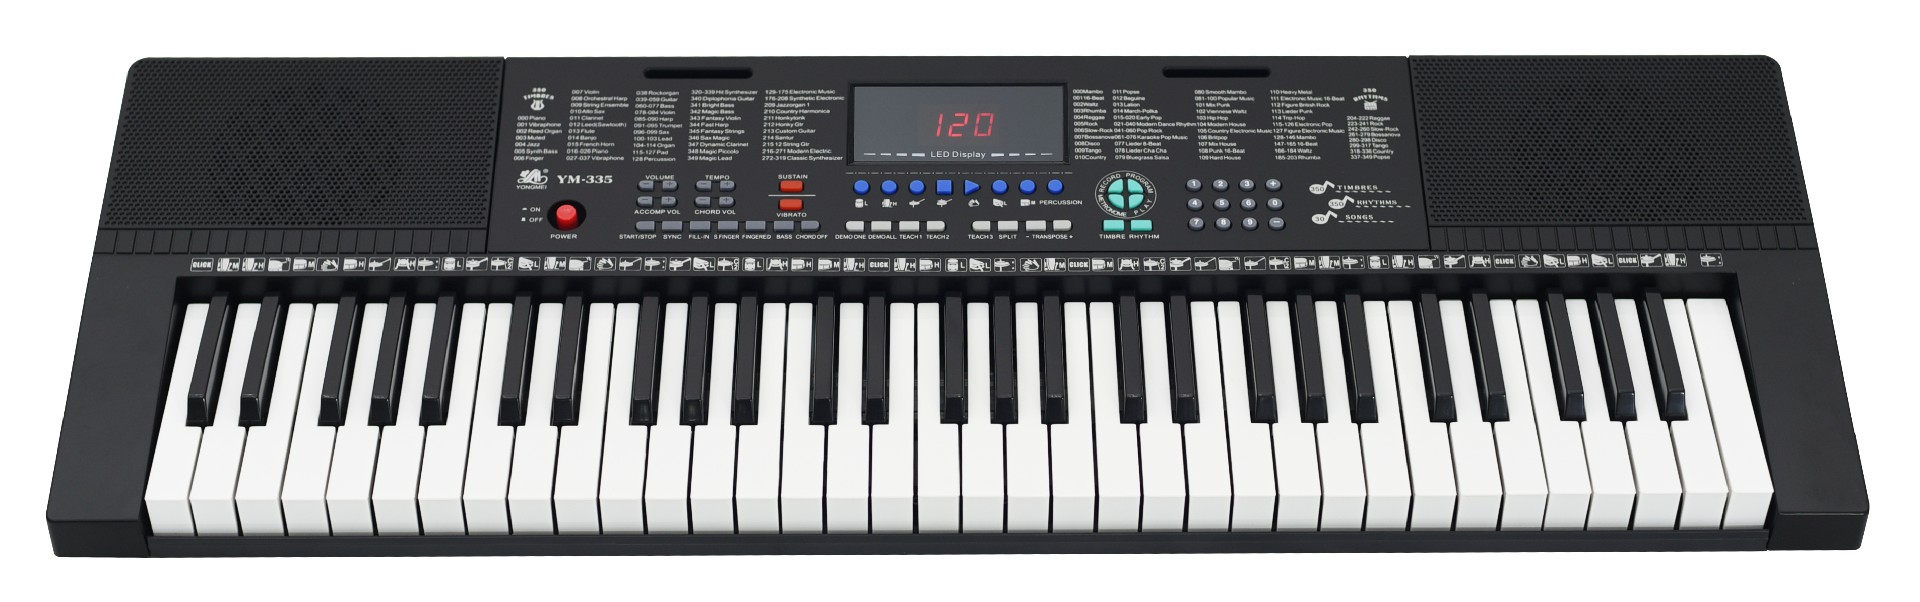 piano keyboard accessories from the 90s